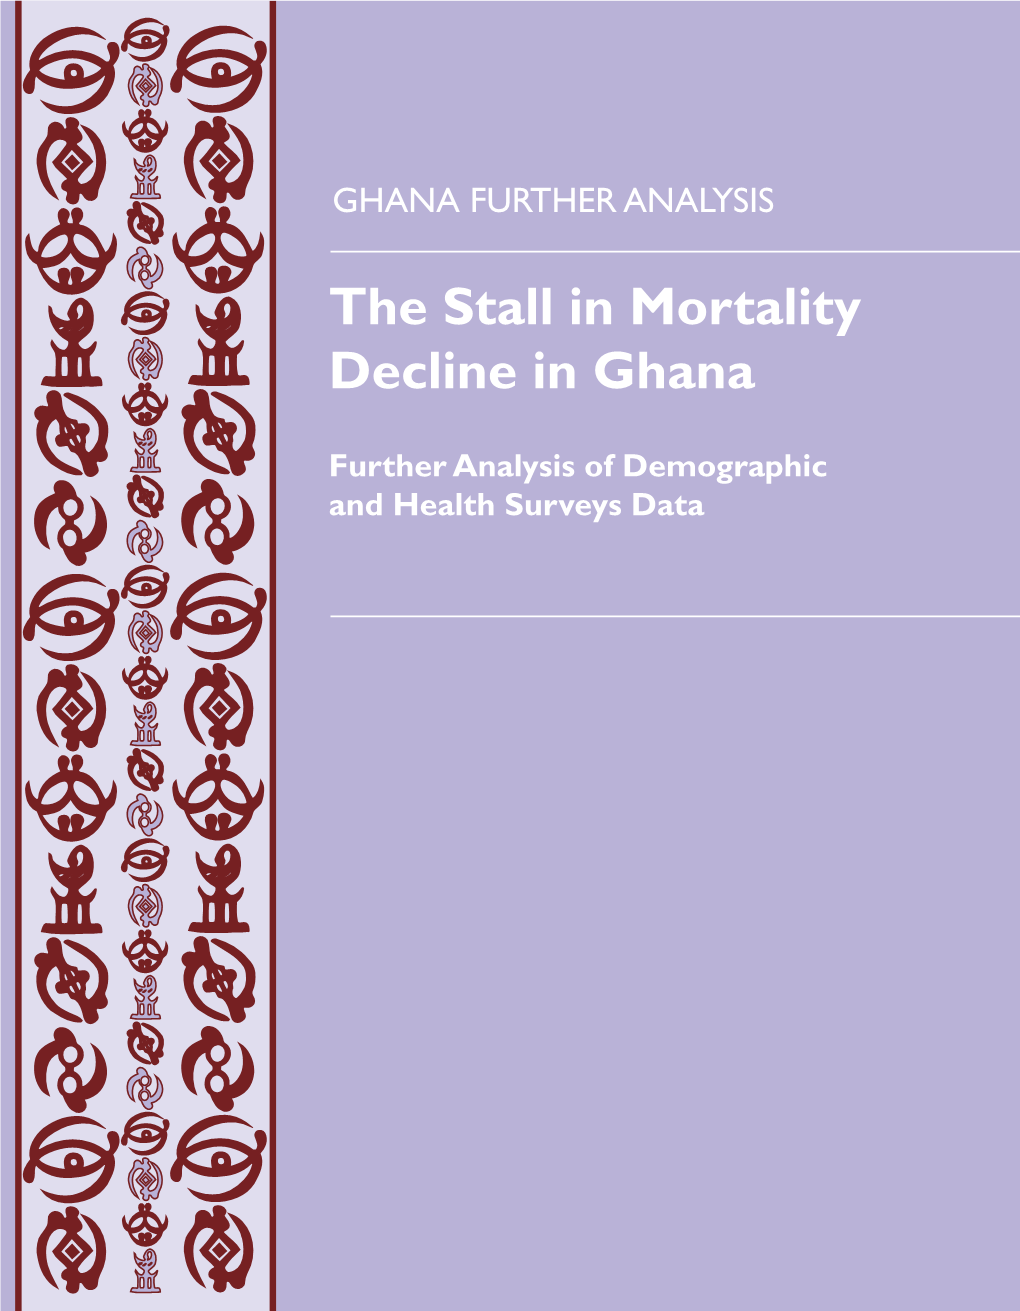 The Stall in Mortality Decline in Ghana